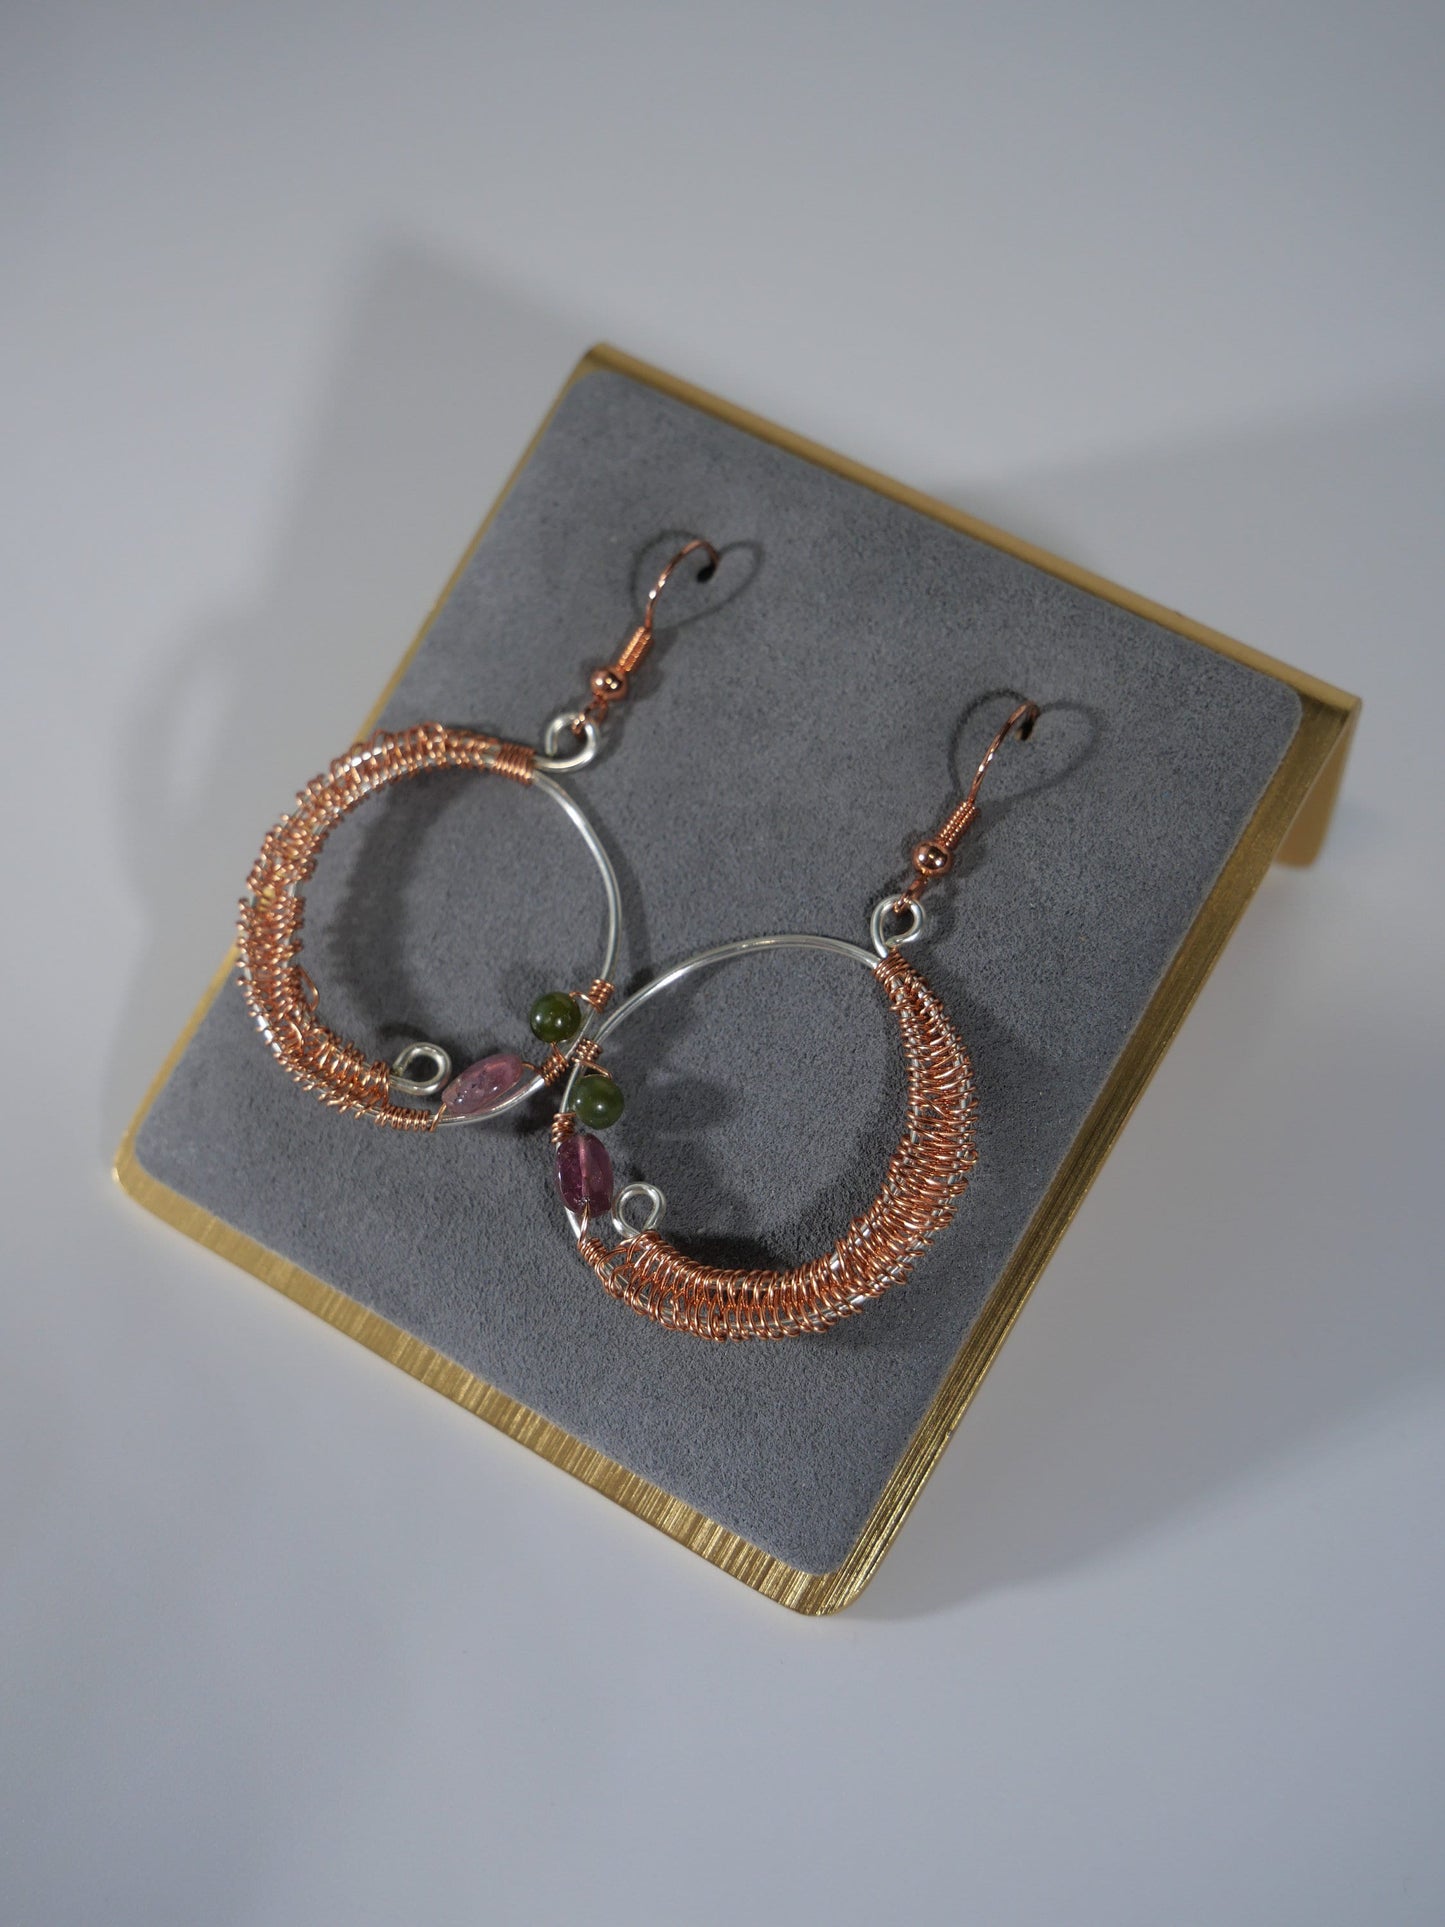 Abstract Wire Earrings, Silver, Copper & Watermelon Tourmaline inspired by Maine, Made in Maine, Maine Art, Maine Jewelry